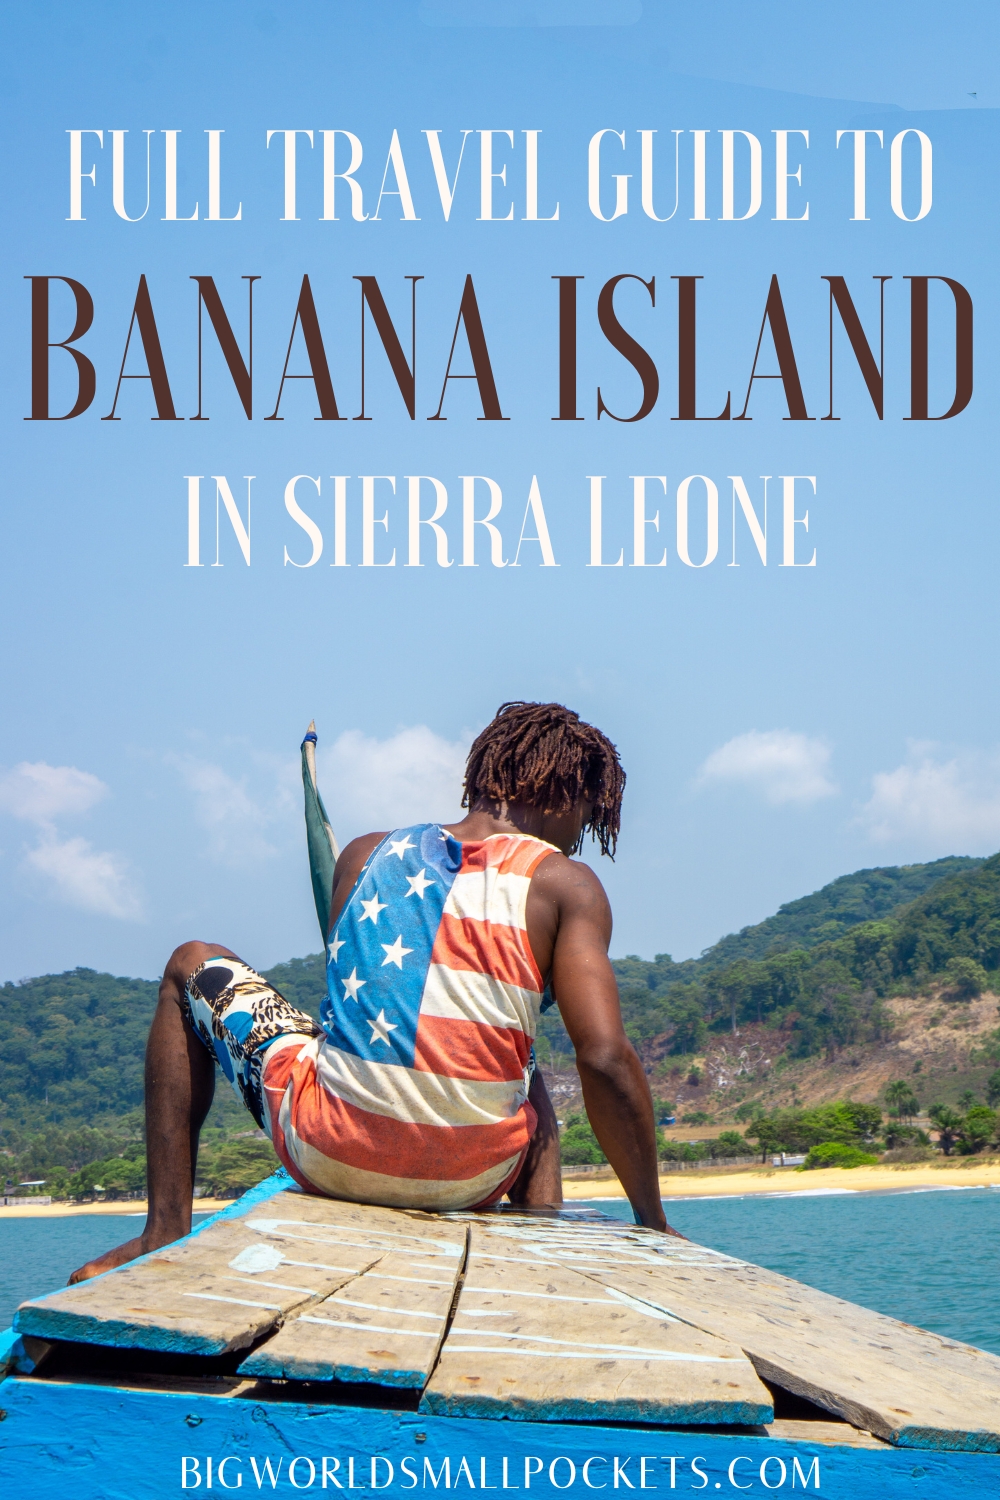 All You Need to Know about Visiting Banana Island, Sierra Leone